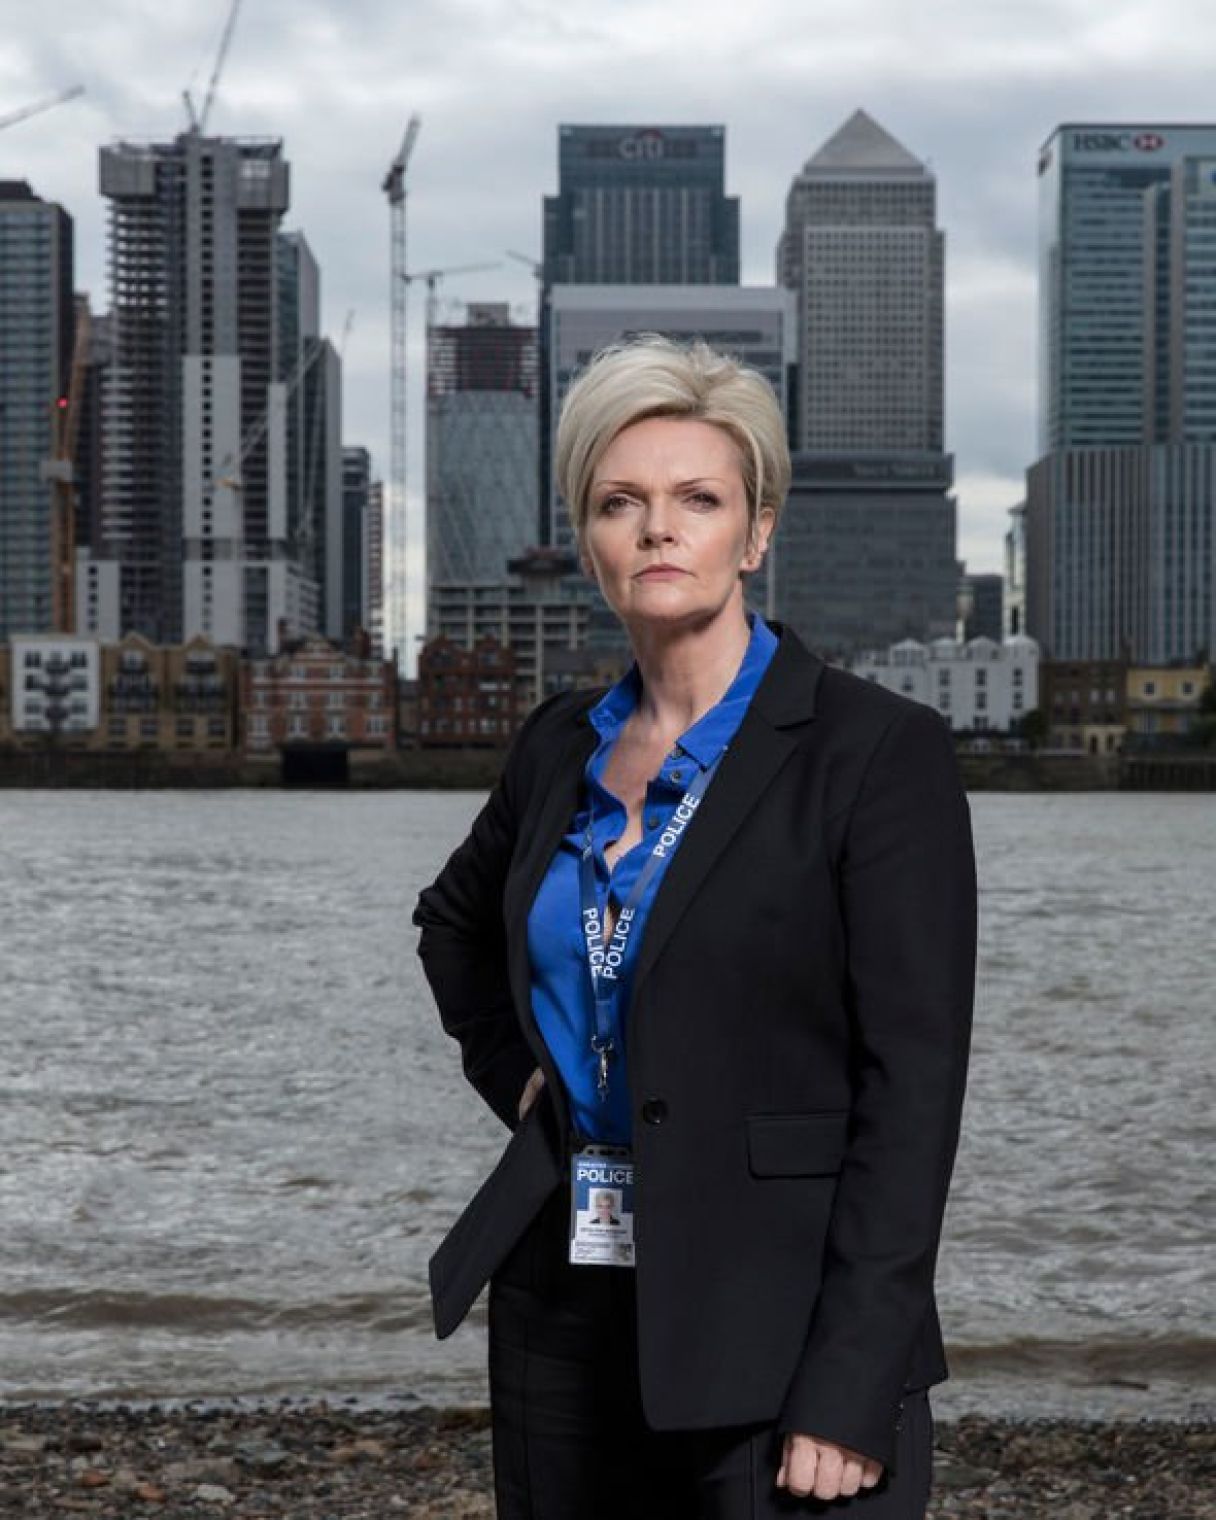 Series 3 of London Kills, starring Sharon Small, premieres on BBC One today